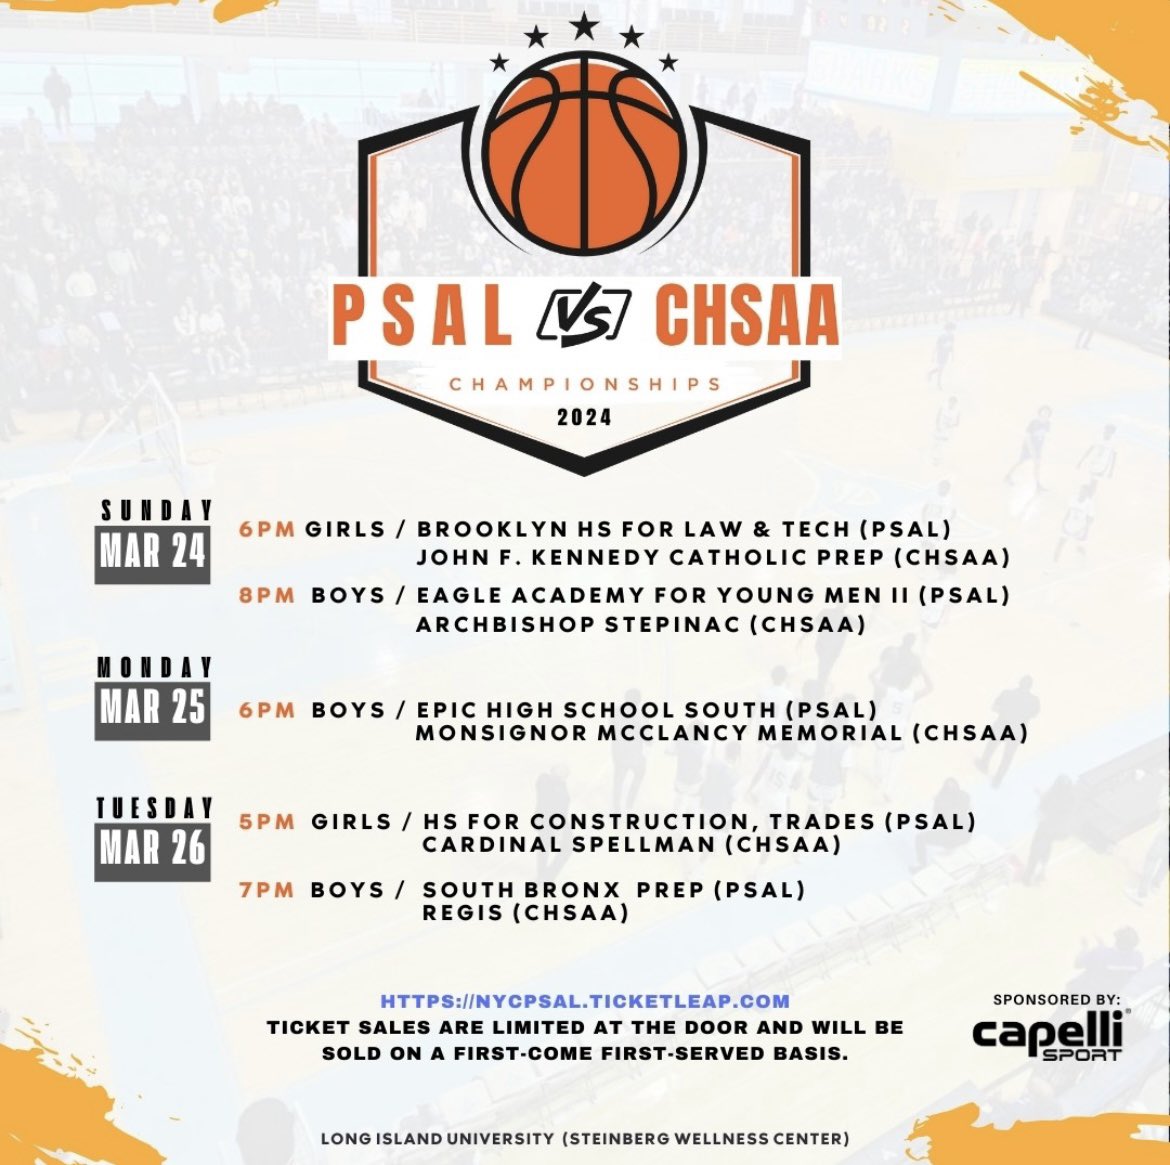 We are just ONE DAY away from the start of the PSAL vs. CHSAA Champions Challenge. Get ready for three exciting nights of basketball to find out who is the best on the hardwood in New York City!